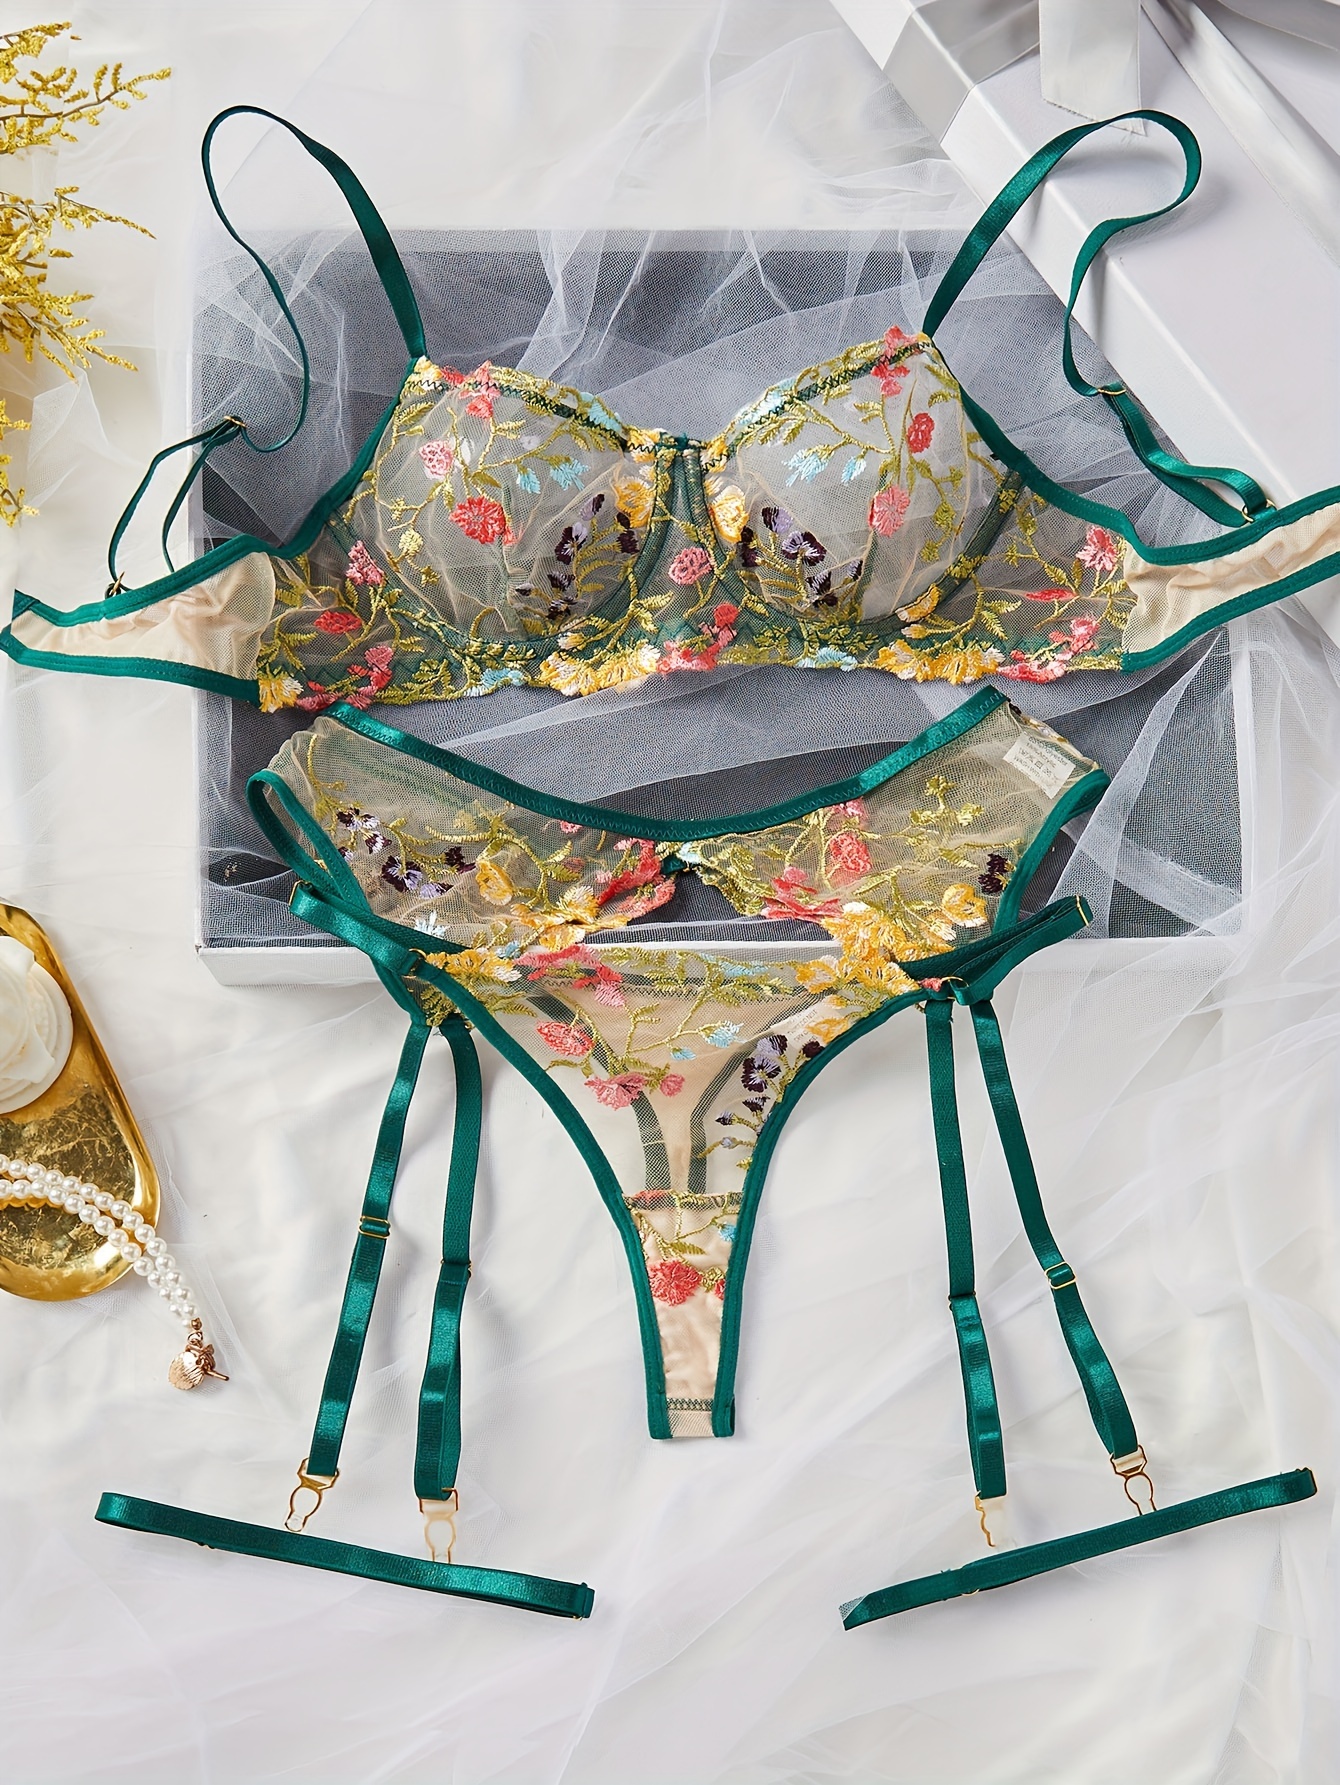 Floral Embroidery Lingerie Set, Mesh Unlined Bra & Thong, Women's Sexy  Lingerie & Underwear